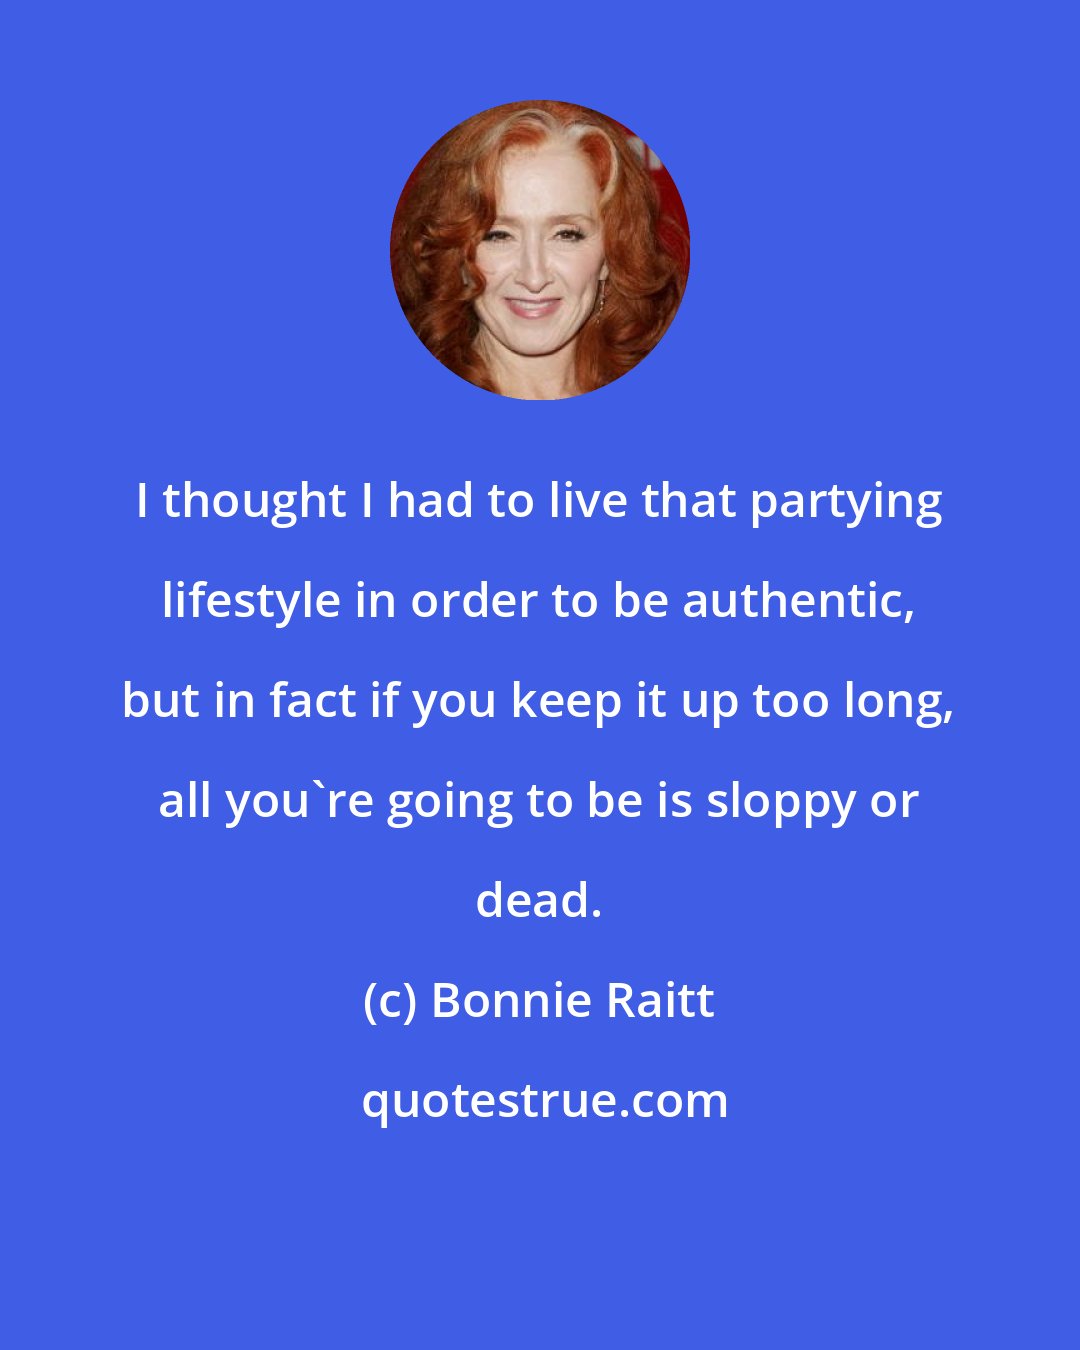 Bonnie Raitt: I thought I had to live that partying lifestyle in order to be authentic, but in fact if you keep it up too long, all you're going to be is sloppy or dead.